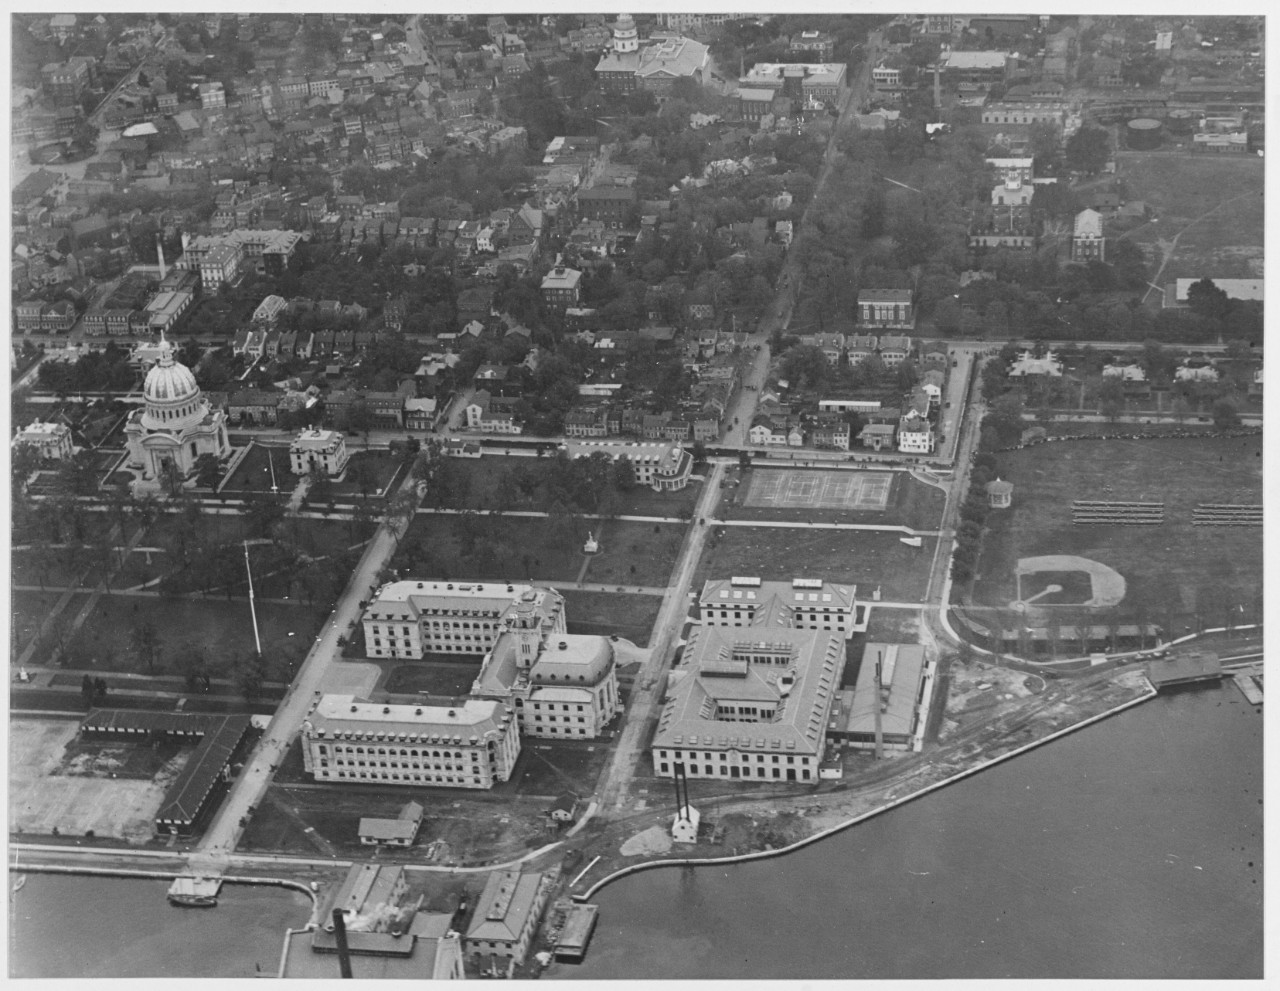 Aerial view of the Naval Academy, Annapolis, Maryland